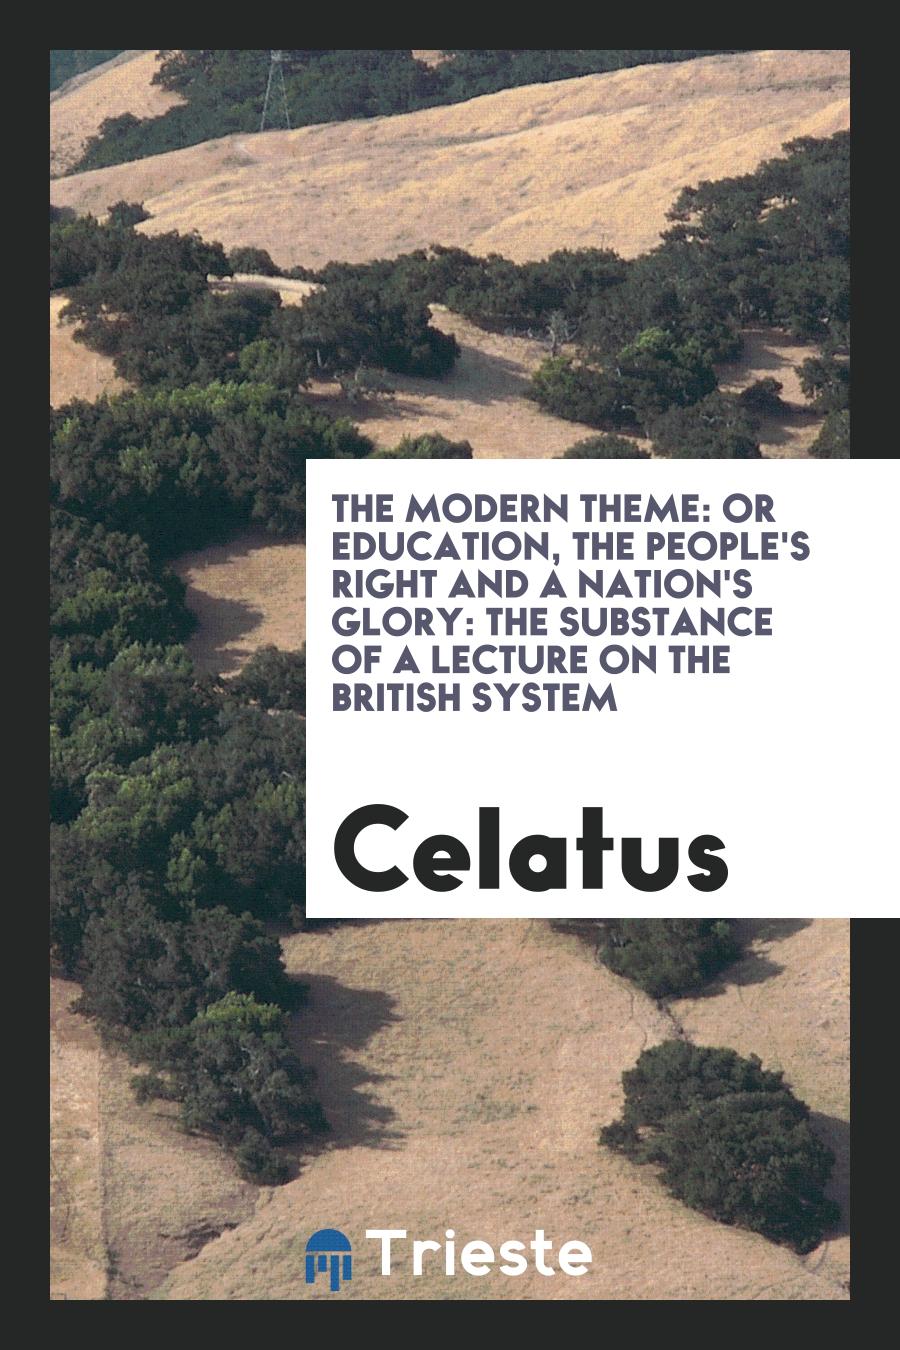 The Modern Theme: Or Education, the People's Right and a Nation's Glory: The Substance of a Lecture on the British System